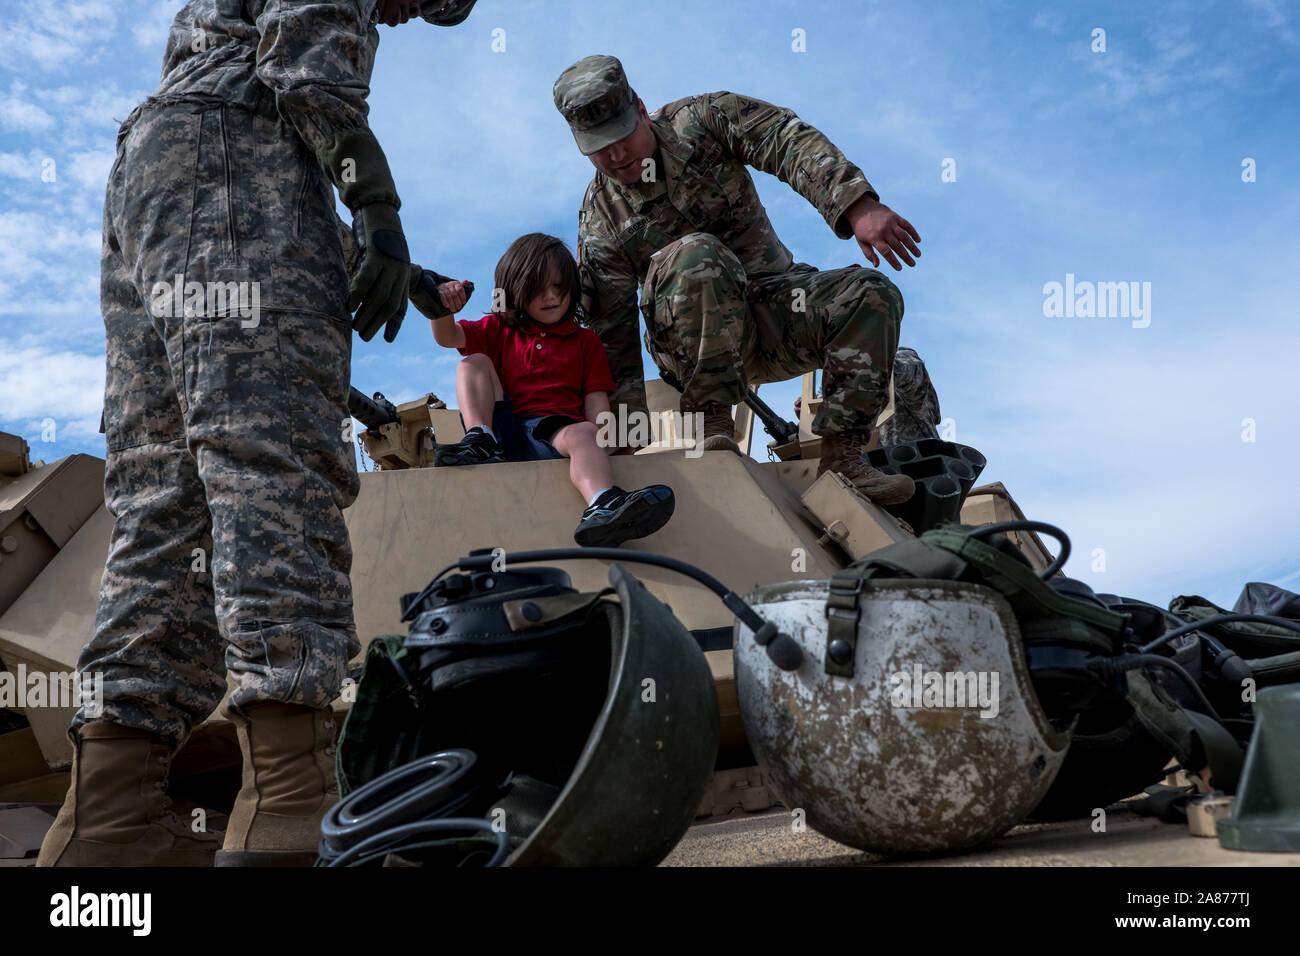 El Paso, Texas, USA. 6th Nov, 2019. HUNTER OBERLE, 4, center, follows his father CPT. RAYMOND OBERLE, right, of the 3rd Armored Brigade Combat Team, 1st Armored Division, as they make their way off an M1A2 Abrams Rank on display during the celebration of Torch Week at Fort Bliss in El Paso, Texas. The celebration commemorates the United States' invasion of North Africa during Operation Torch on November 8 through November 16, 1942 during World War II. Credit: Joel Angel Juarez/ZUMA Wire/Alamy Live News Stock Photo